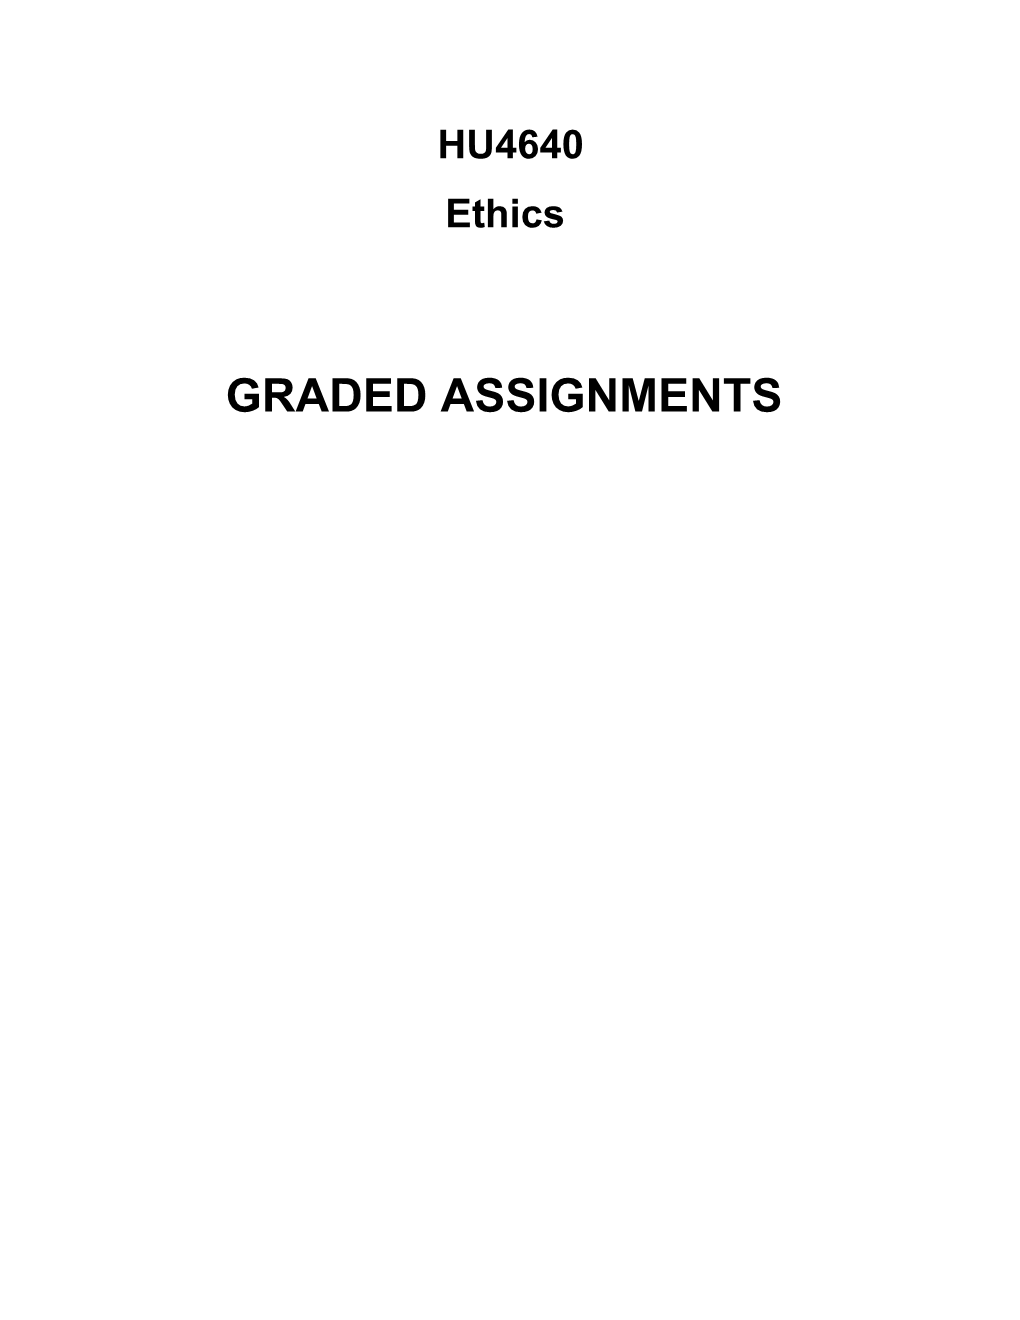 Graded Assignments